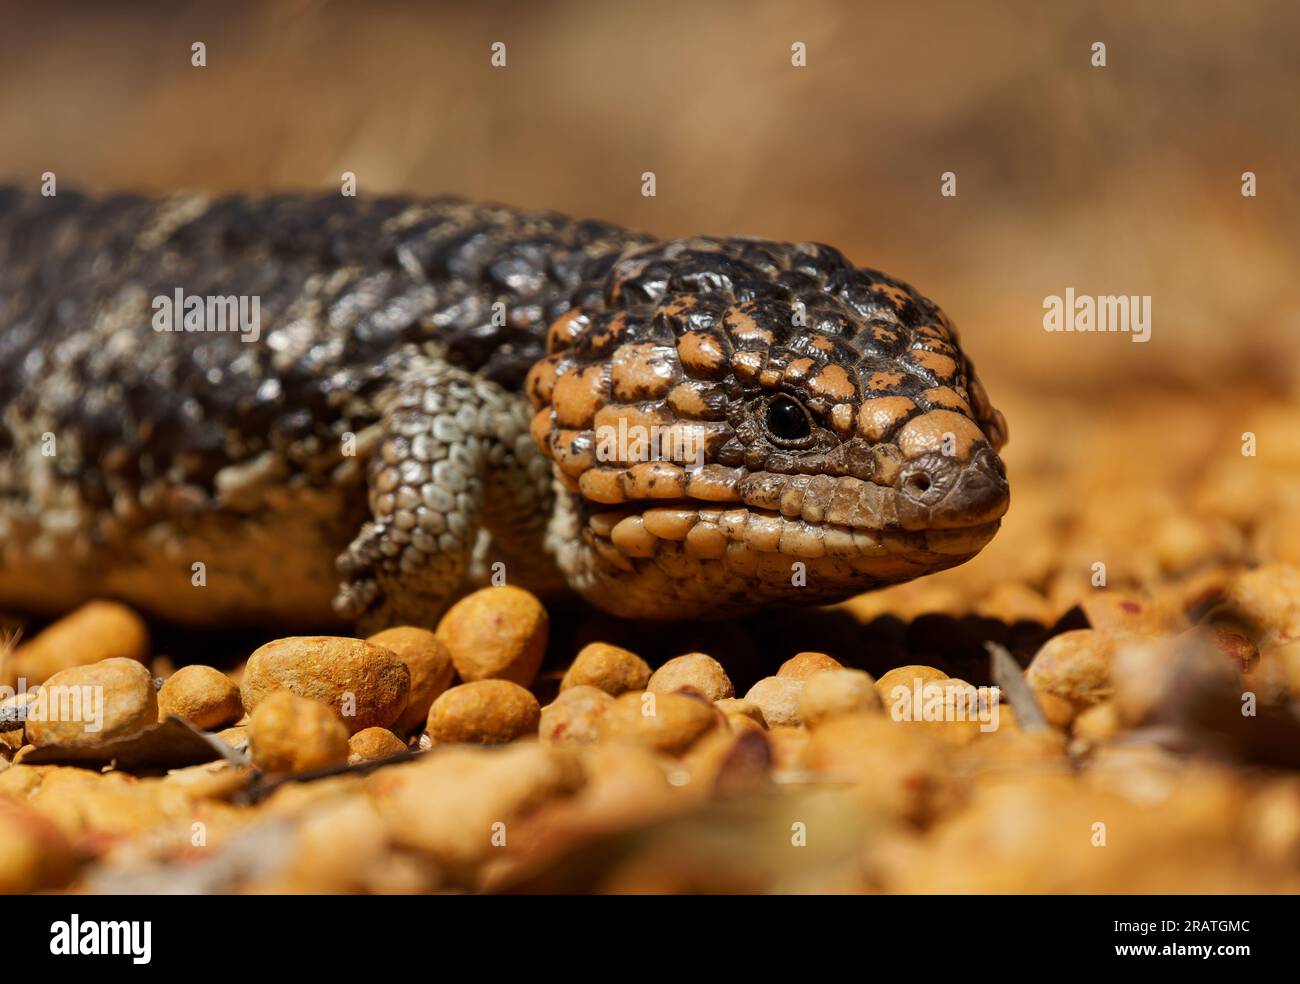 Tiliqua rugosa known as Shingleback skink or Bobtail lizard or Sleepy or Pinecone lizard, short tailed slow species of Blue-tongued skink endemic to A Stock Photo